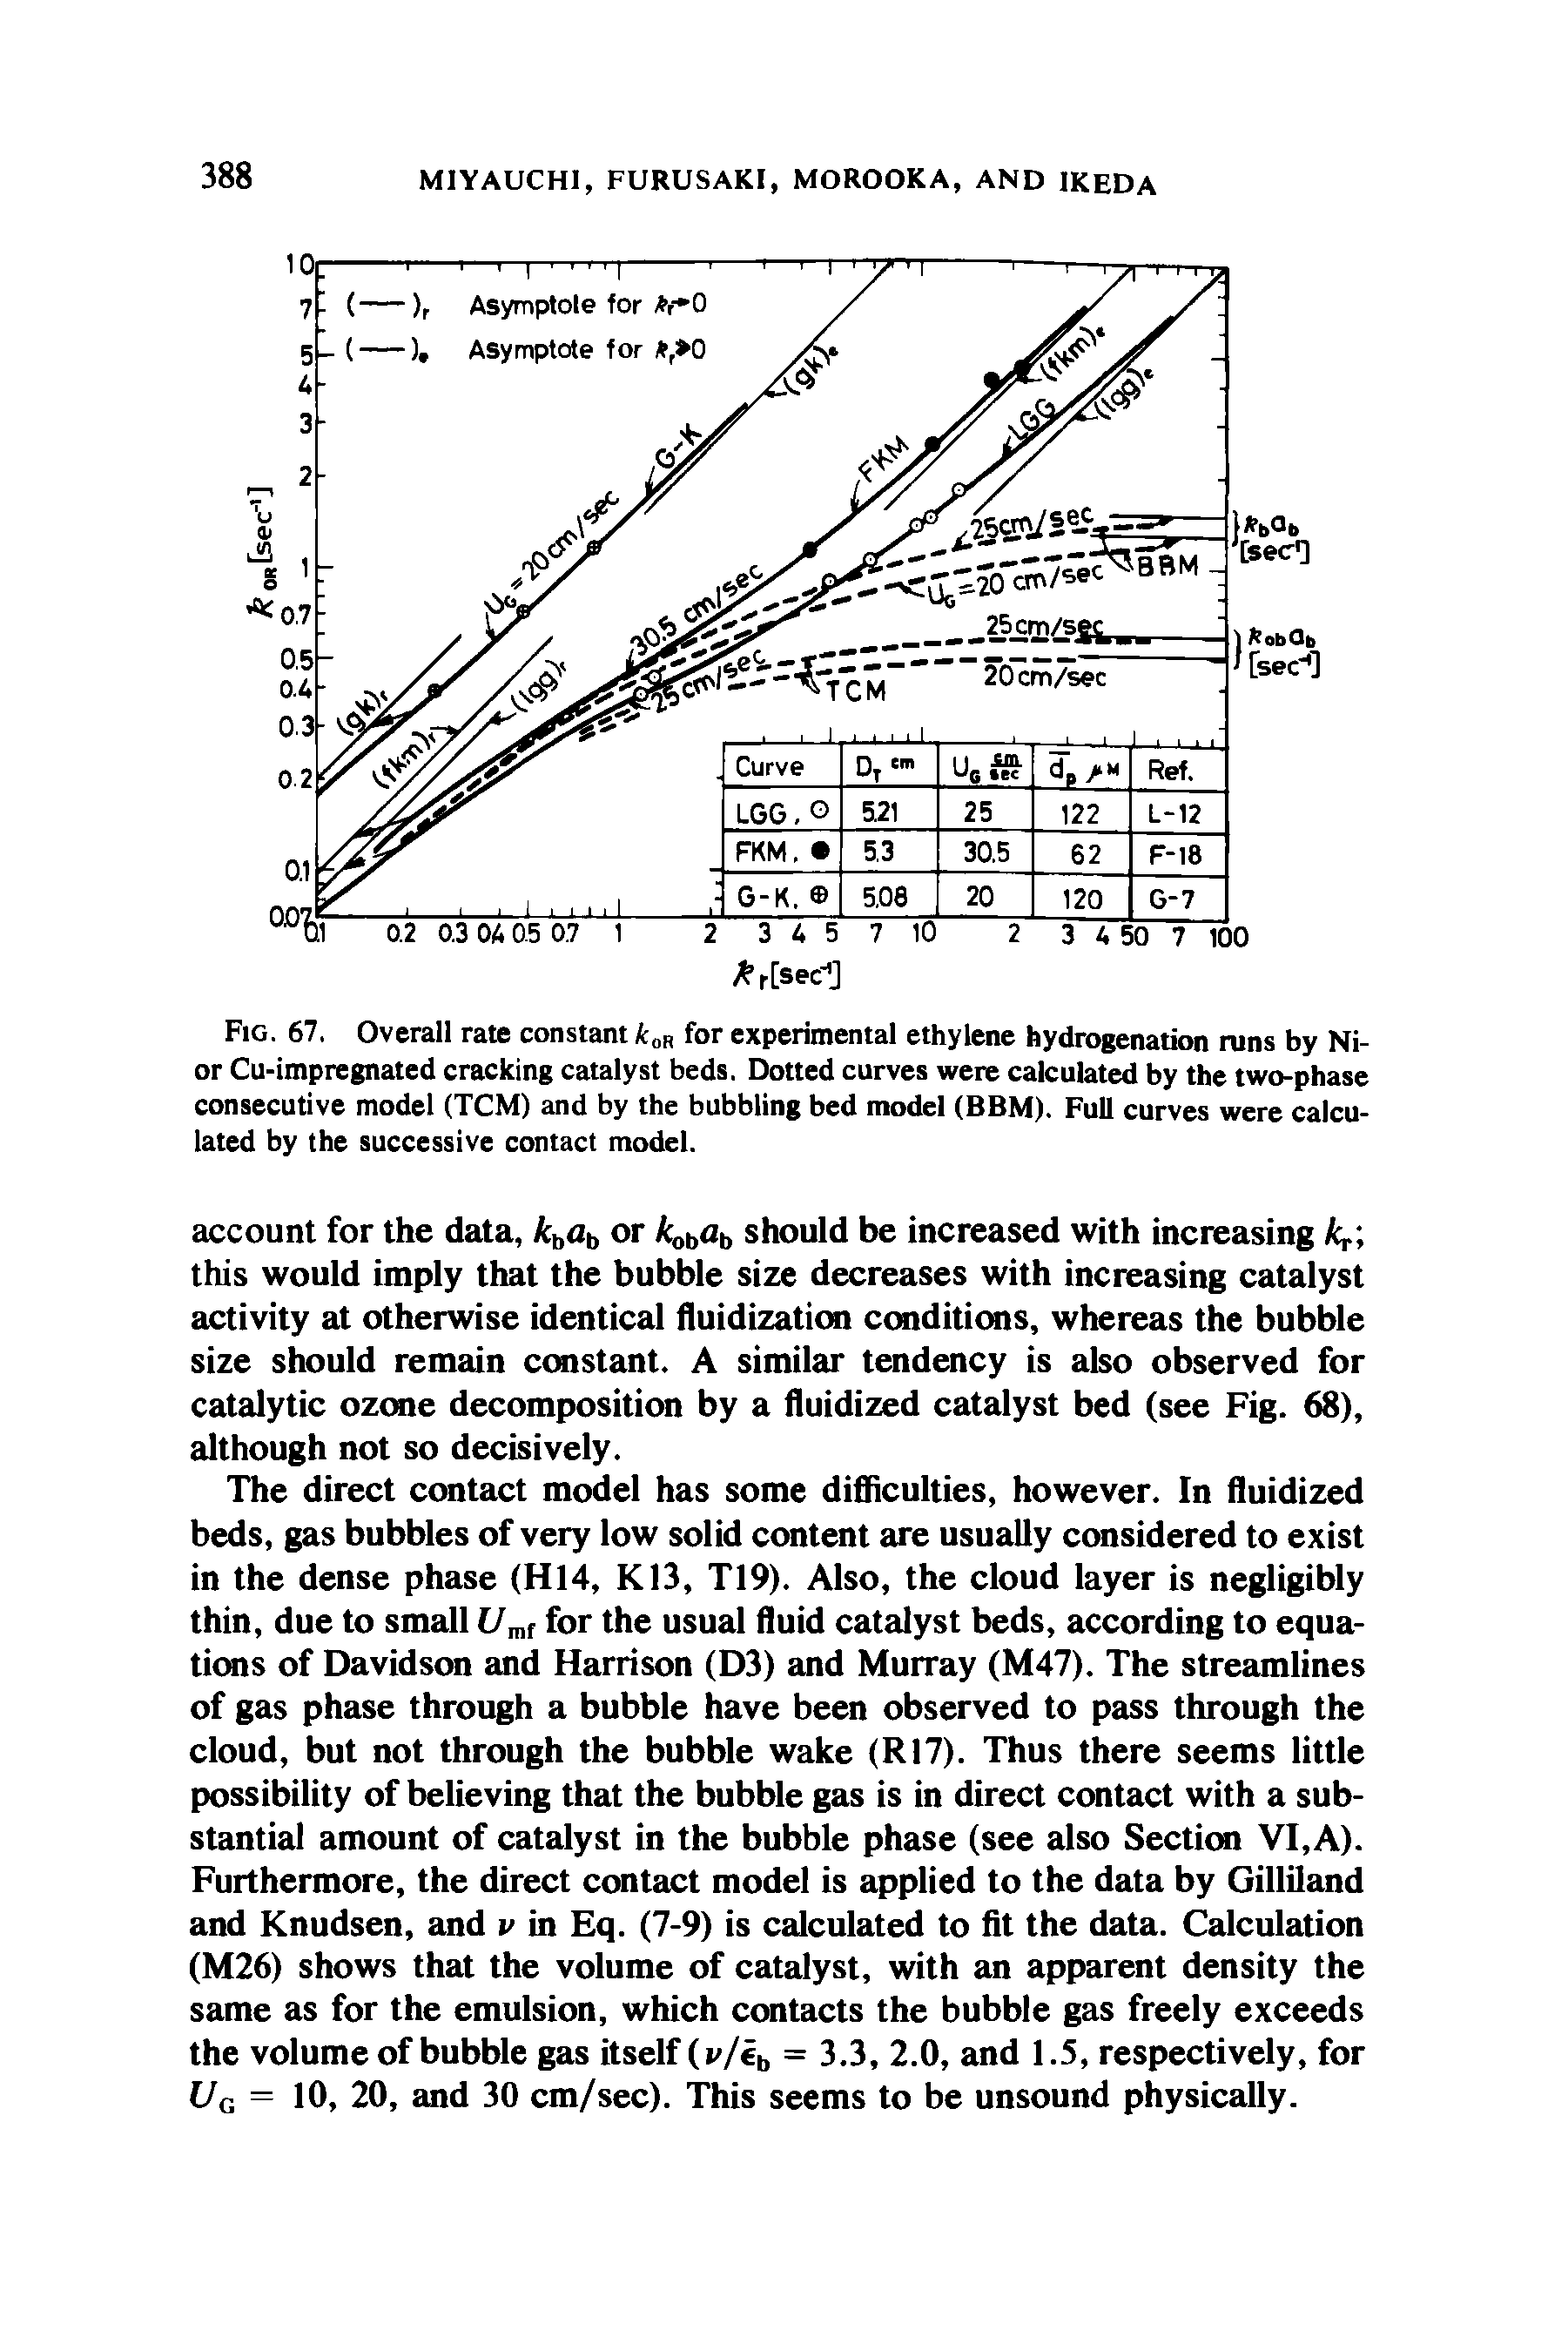 Fig. 67, Overall rate constant k s for experimental ethylene hydrogenation runs by Ni-or Cu-impregnated cracking catalyst beds. Dotted curves were calculated by the two-phase consecutive model (TCM) and by the bubbling bed model (BBM). Full curves were calculated by the successive contact model.